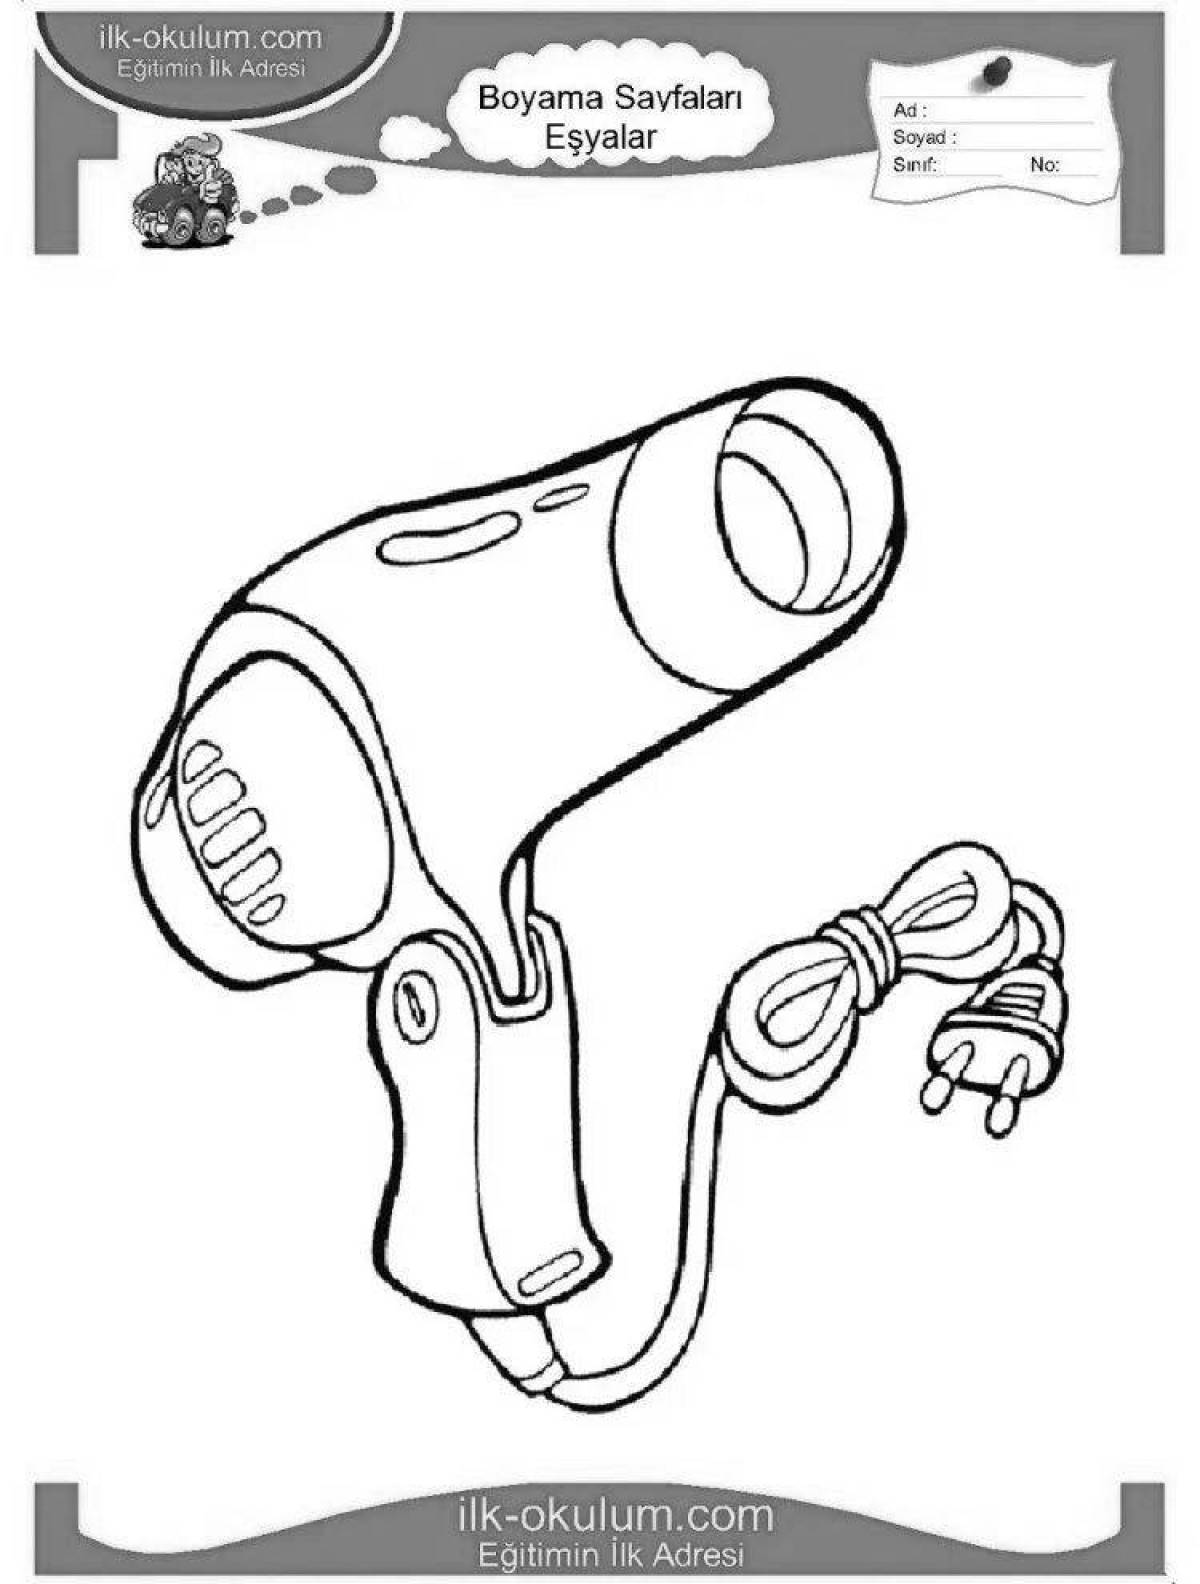 Luminous hair dryer coloring page